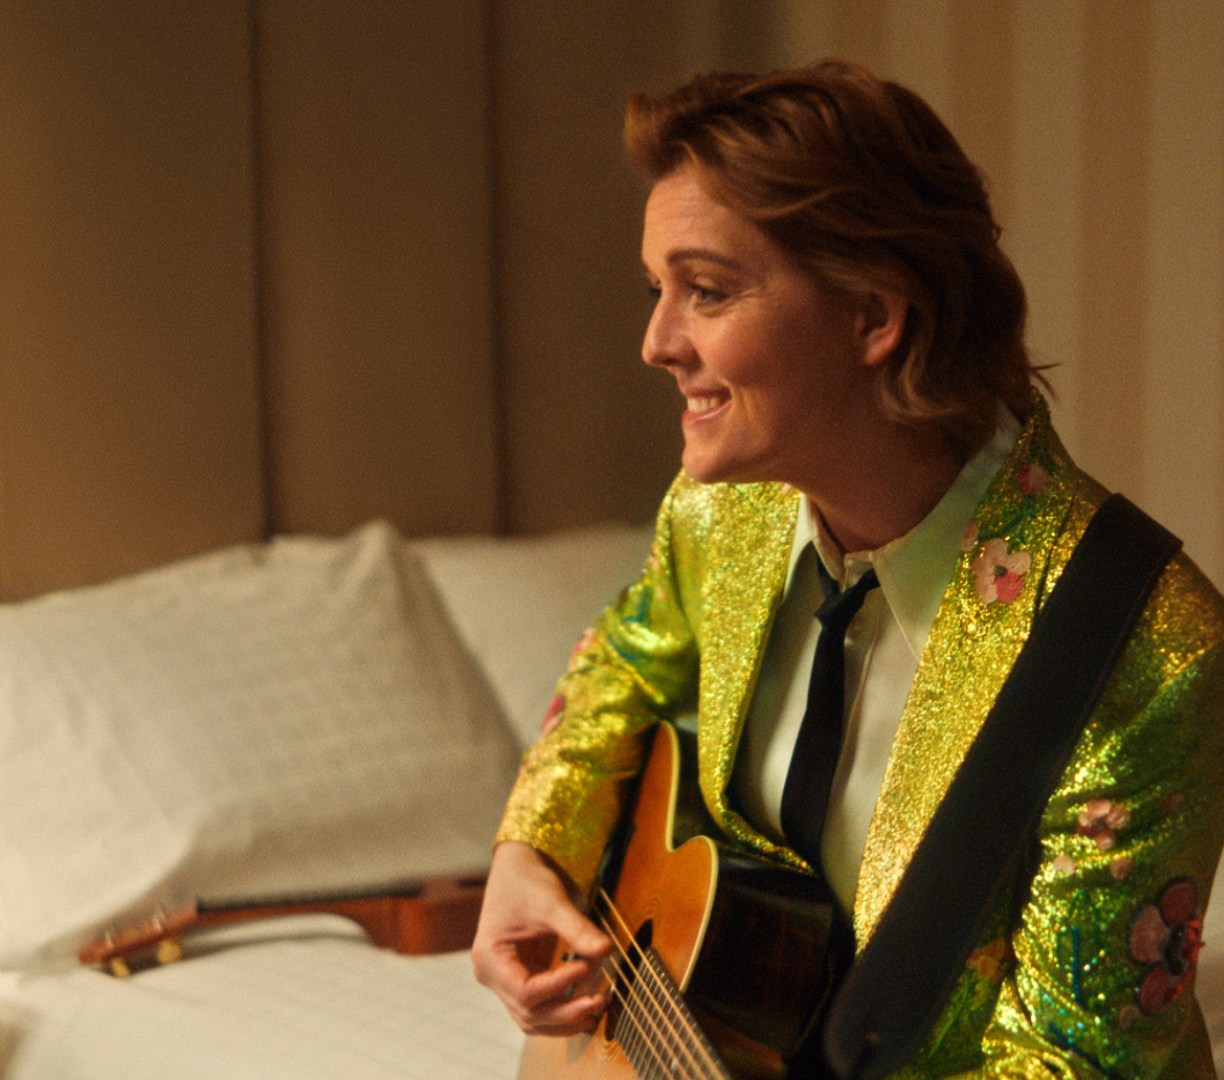 Hilton Connecting Room Concerts with Brandi Carlile